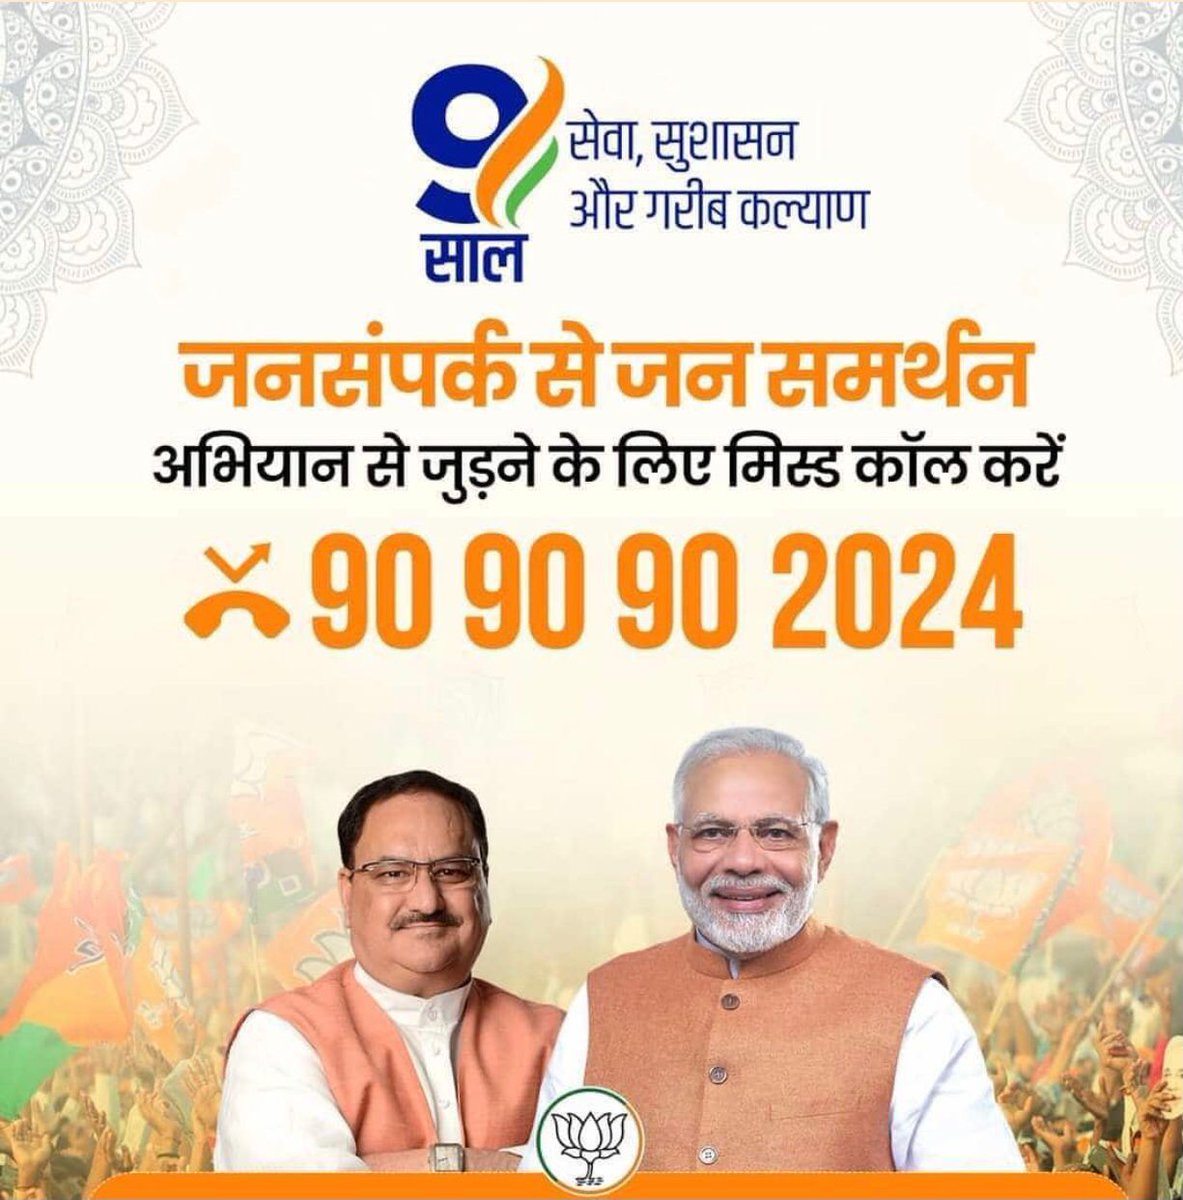 Requesting you, Kindly give missed call to show your support to Modiji…